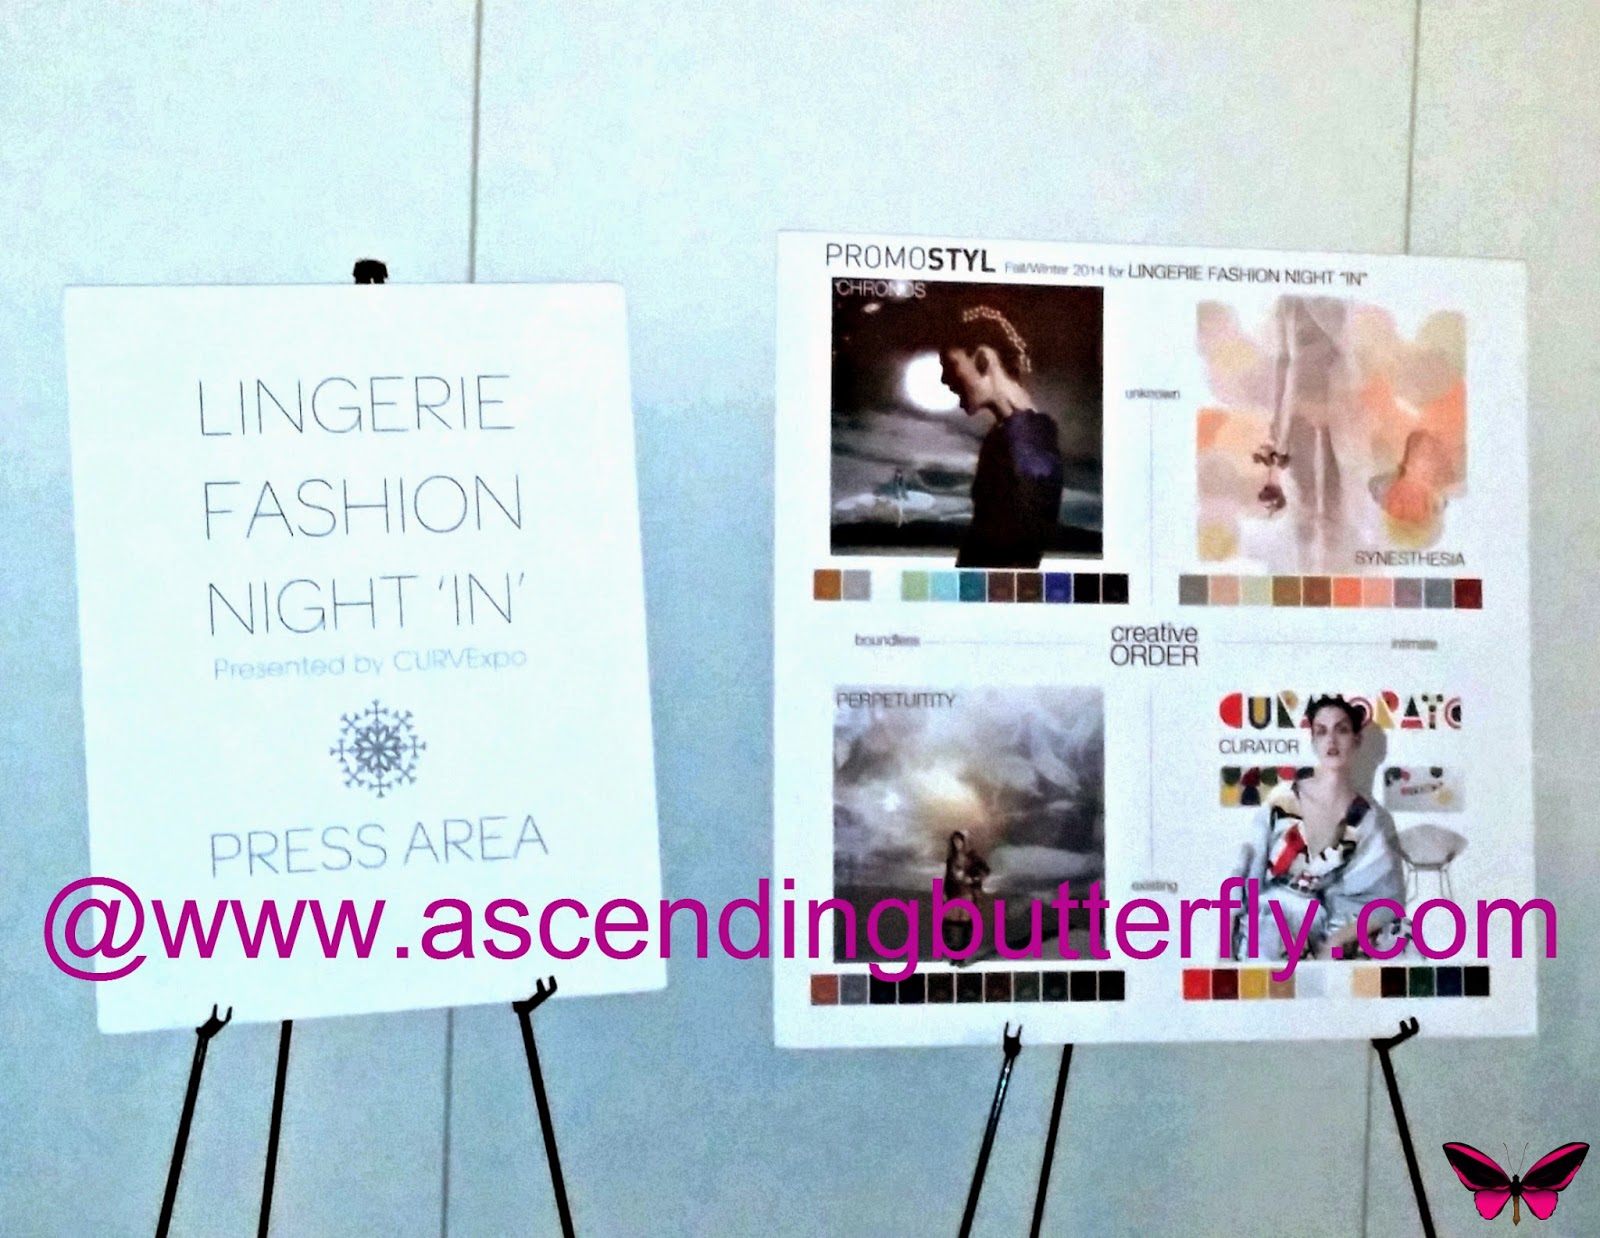 Lingerie Fashion Night 'IN' PROMOSTYL Press Preview